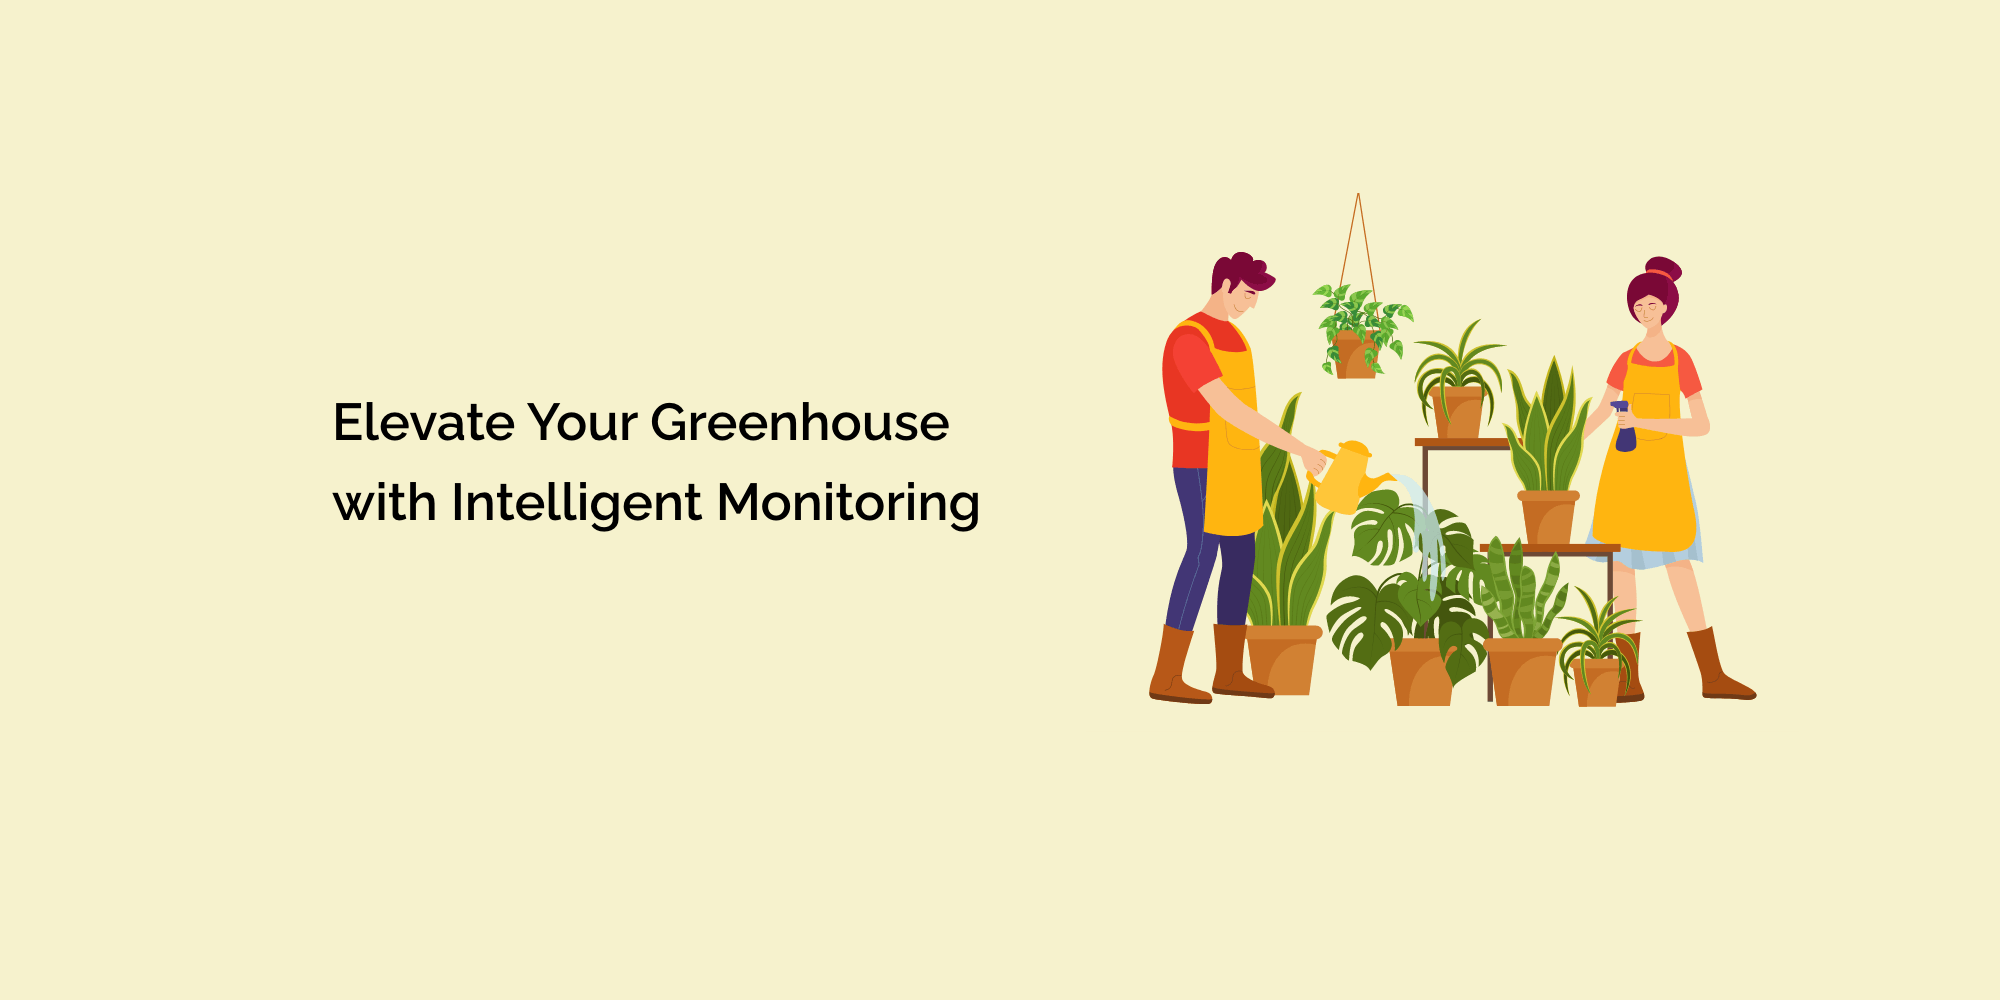 Growth Hacking 101: Elevate Your Greenhouse with Intelligent Monitoring